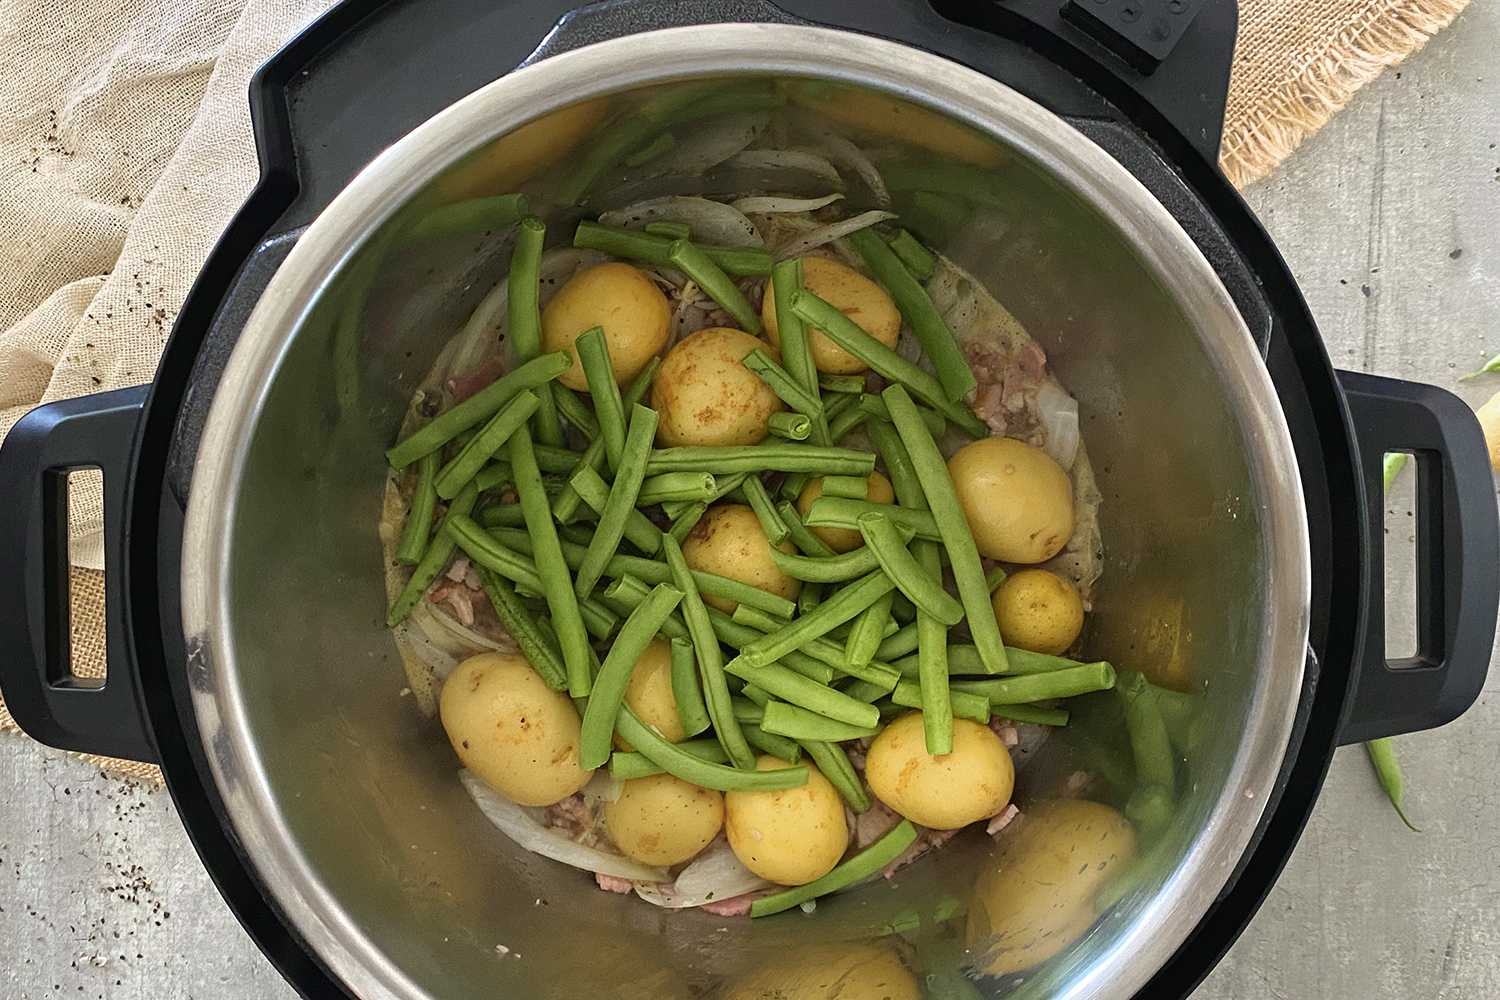 How Long To Cook Green Beans And Potatoes In An Electric Pressure Cooker